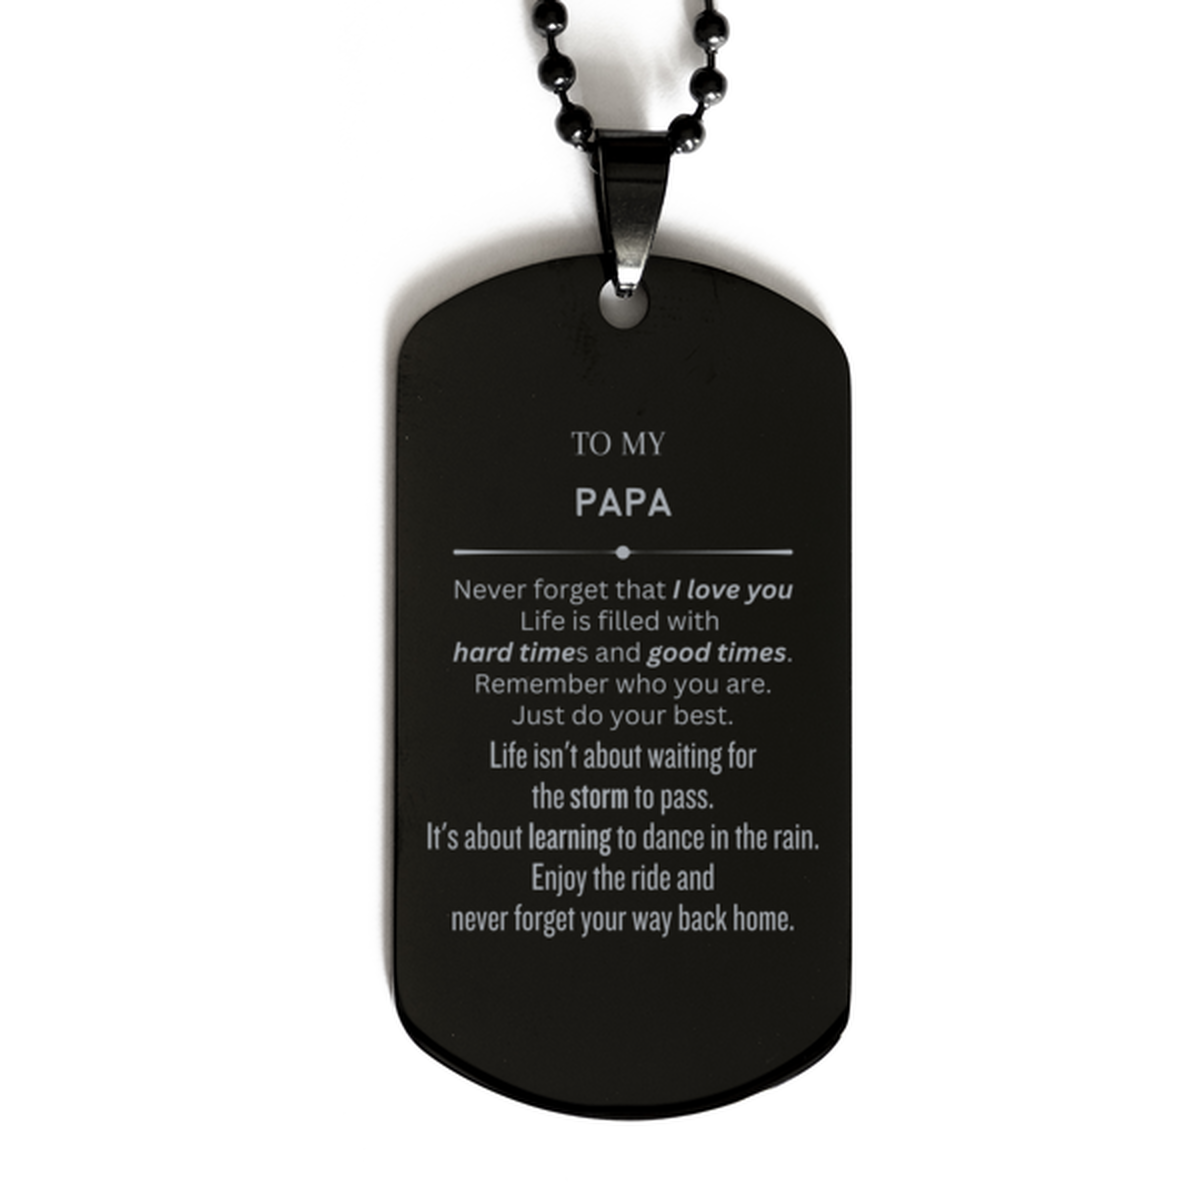 Christmas Papa Black Dog Tag Gifts, To My Papa Birthday Thank You Gifts For Papa, Graduation Unique Gifts For Papa To My Papa Never forget that I love you life is filled with hard times and good times. Remember who you are. Just do your best